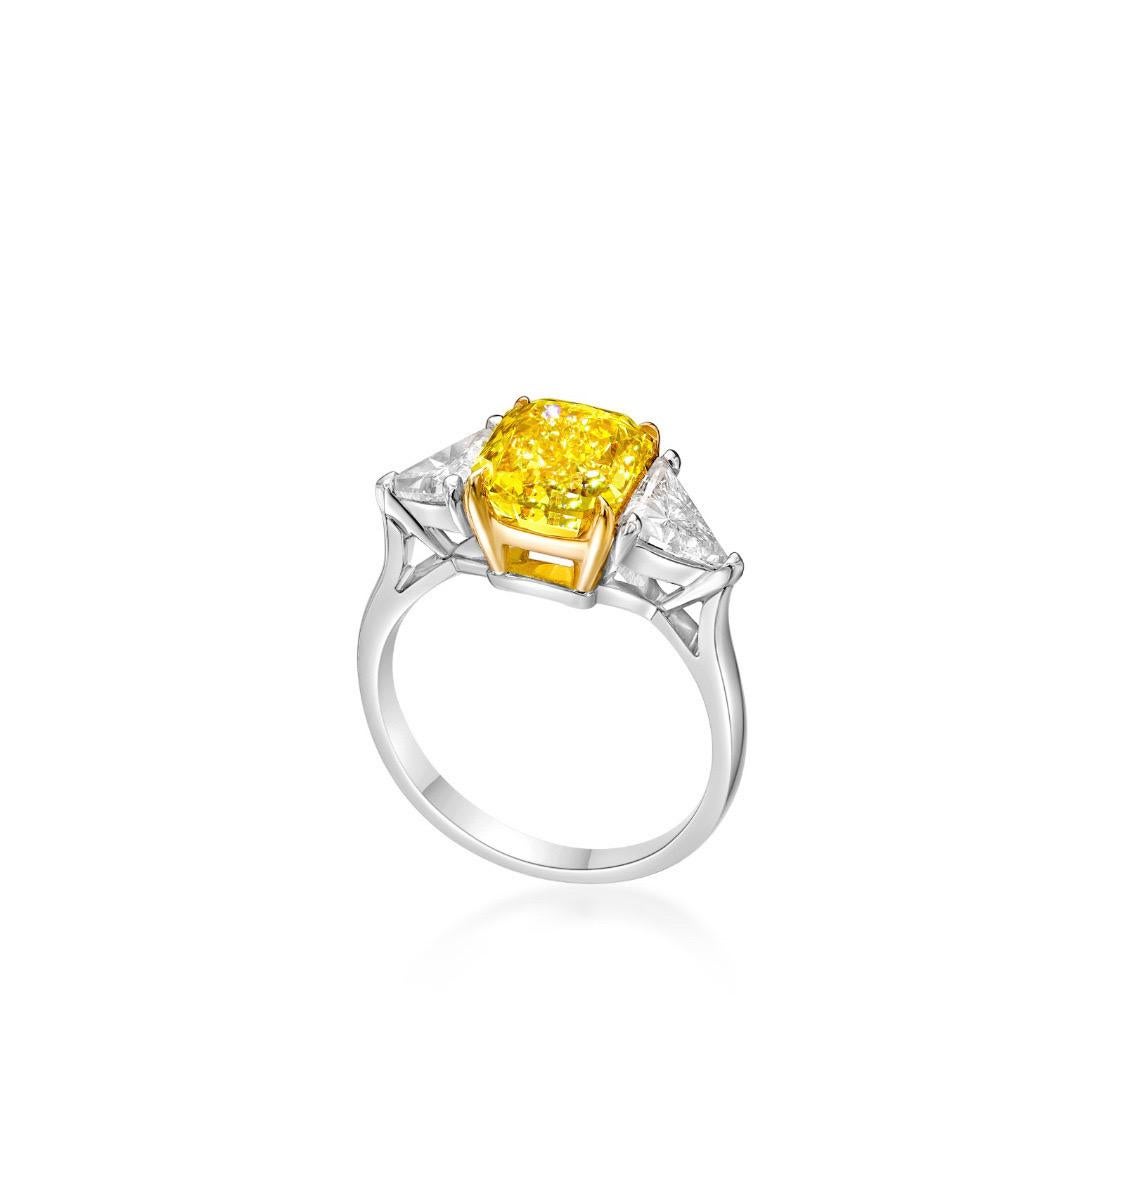 Emilio Jewelry Gia Certified 3.00 Carat Fancy Vivid Yellow Diamond Ring   In New Condition For Sale In New York, NY